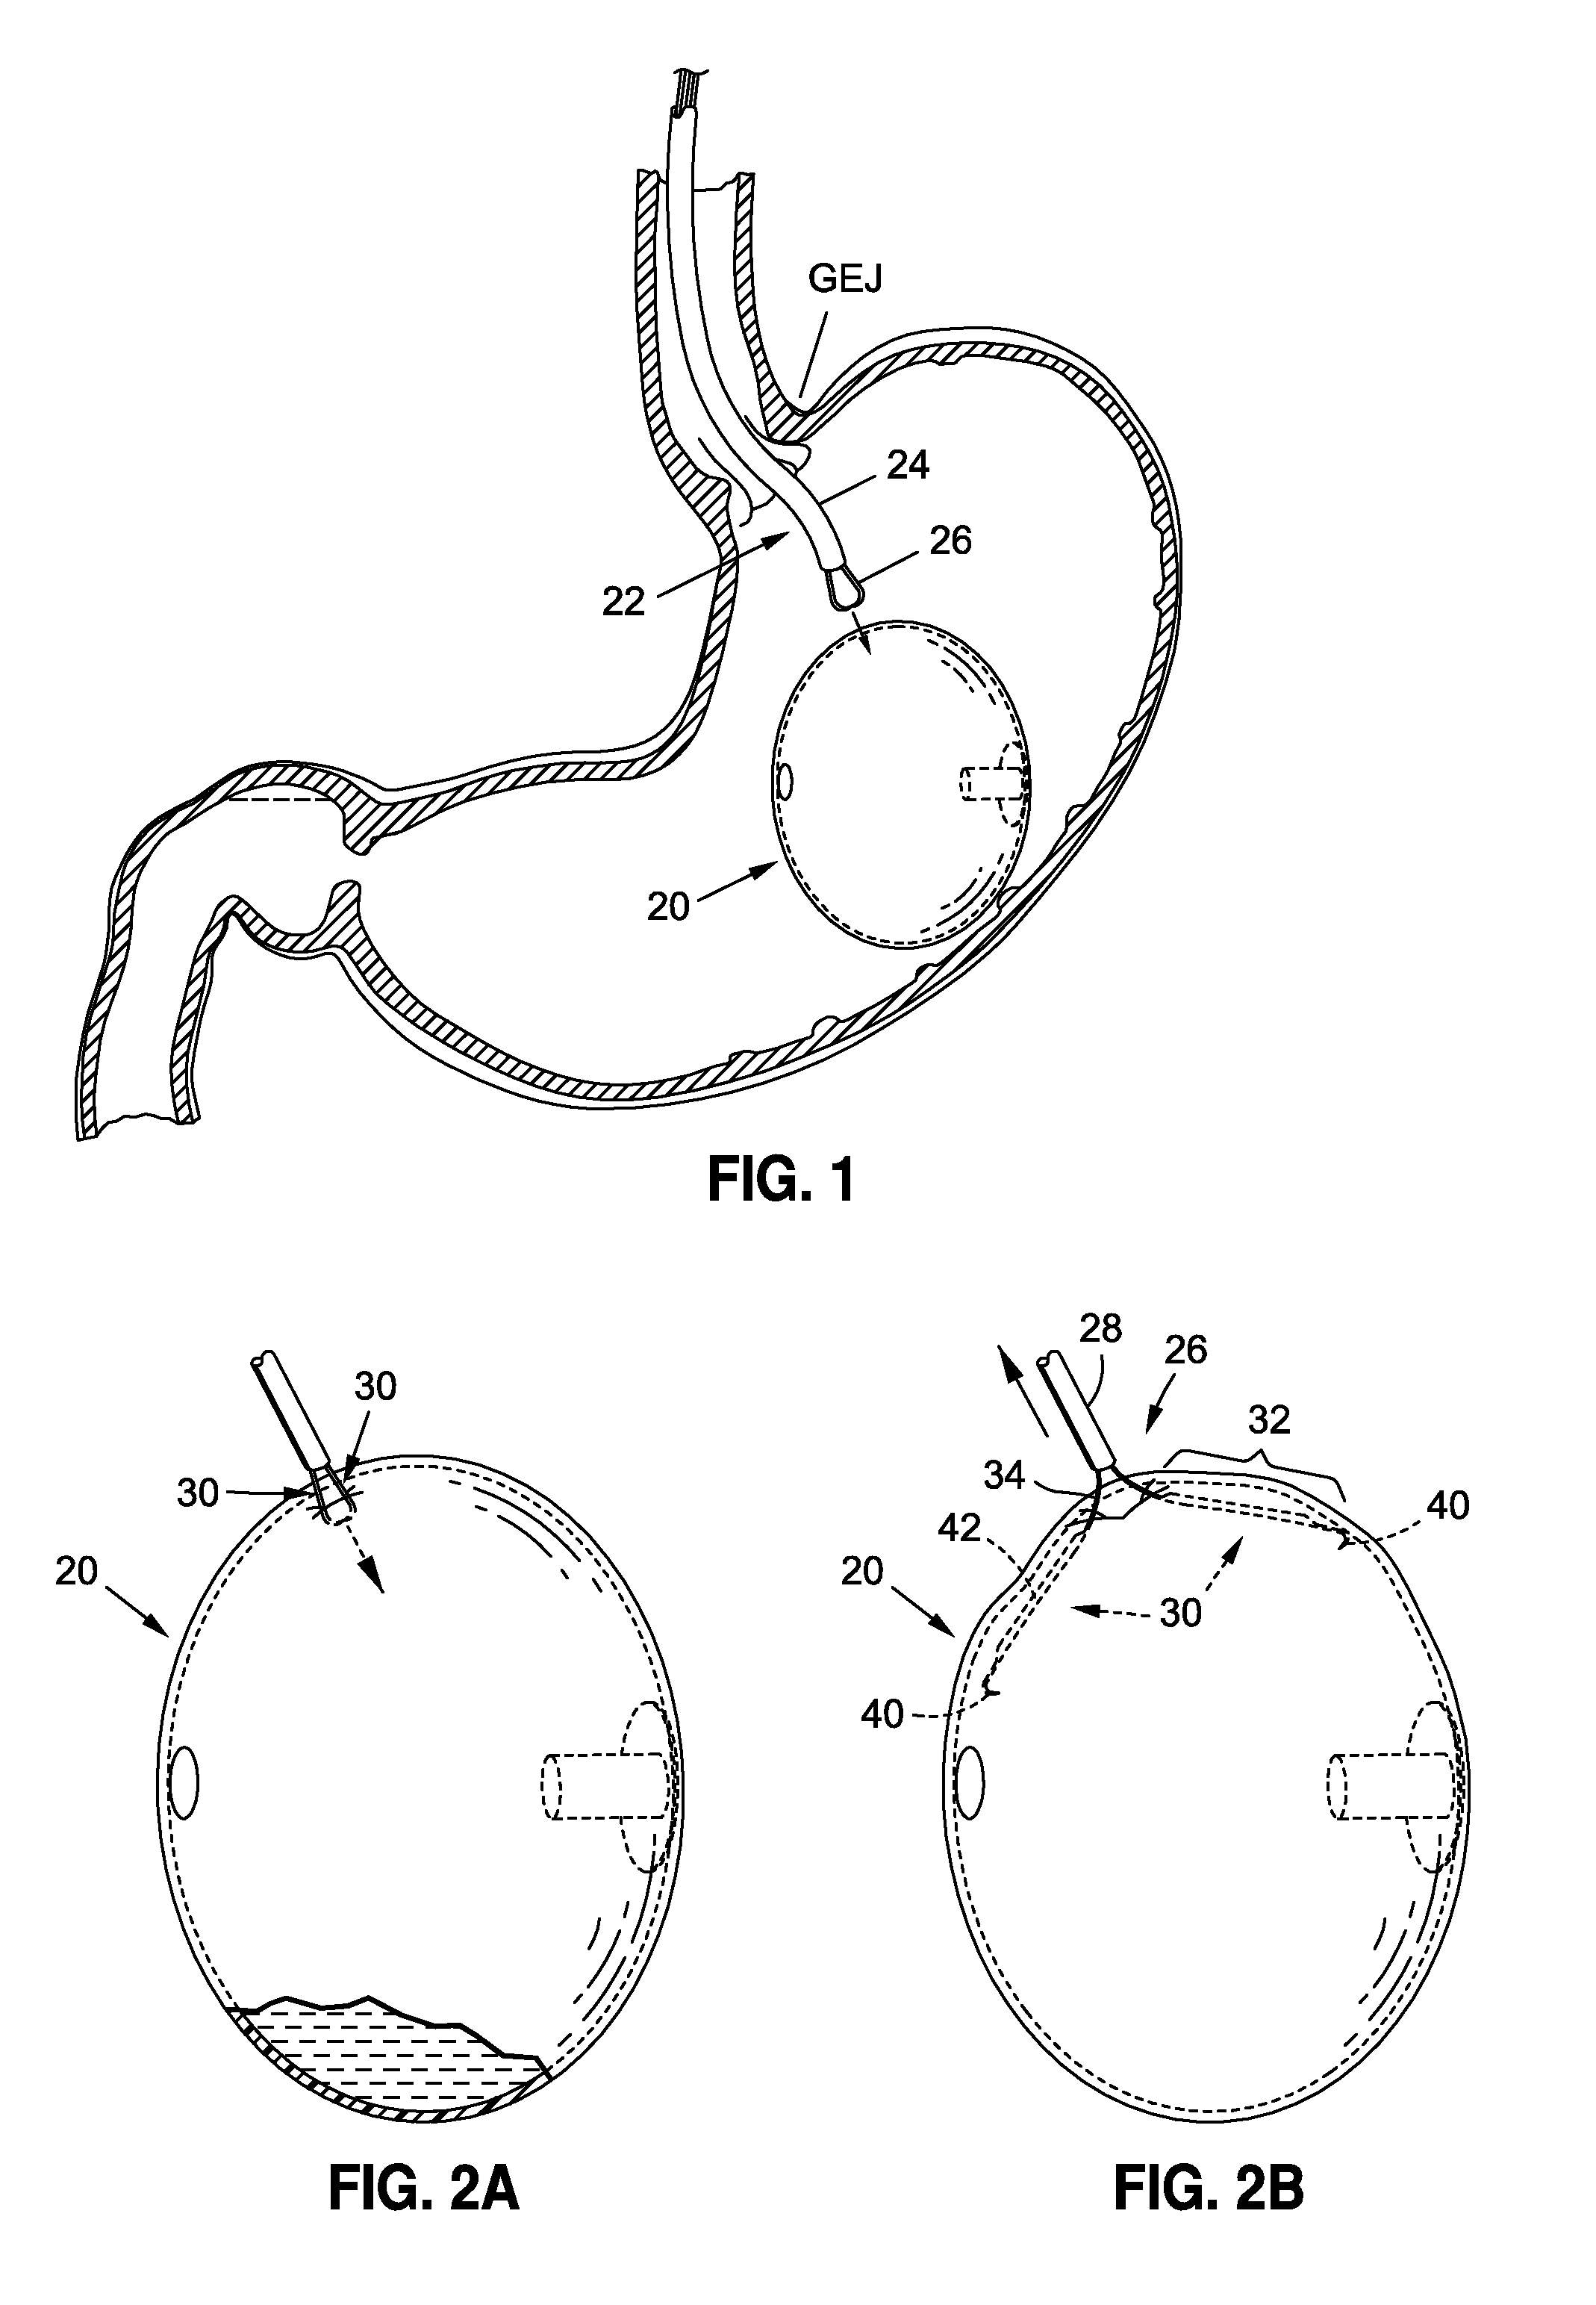 Endoscopic Tools for the Removal of Balloon-Like Intragastric Devices